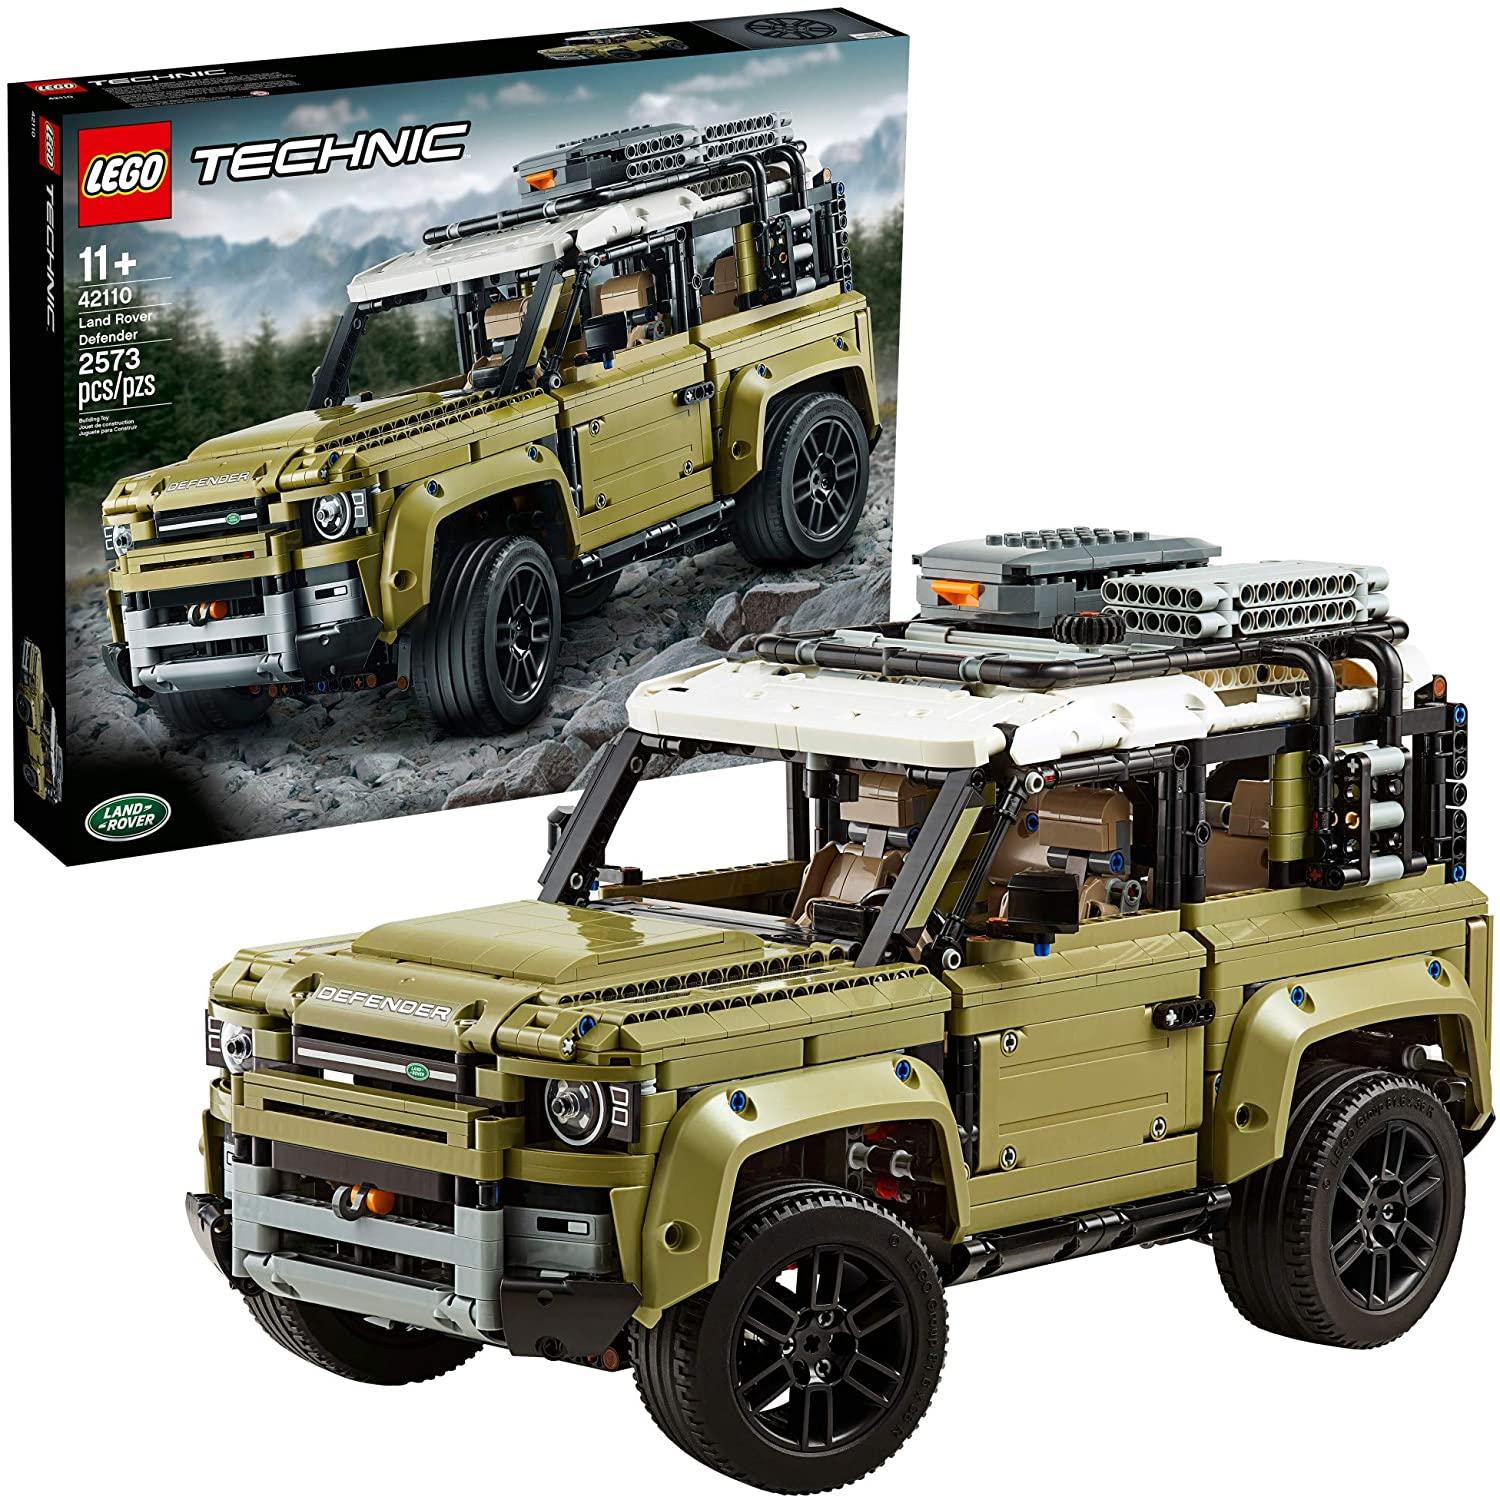 LEGO Technic Land Rover Defender Building Set 42110 for $159.99 Shipped